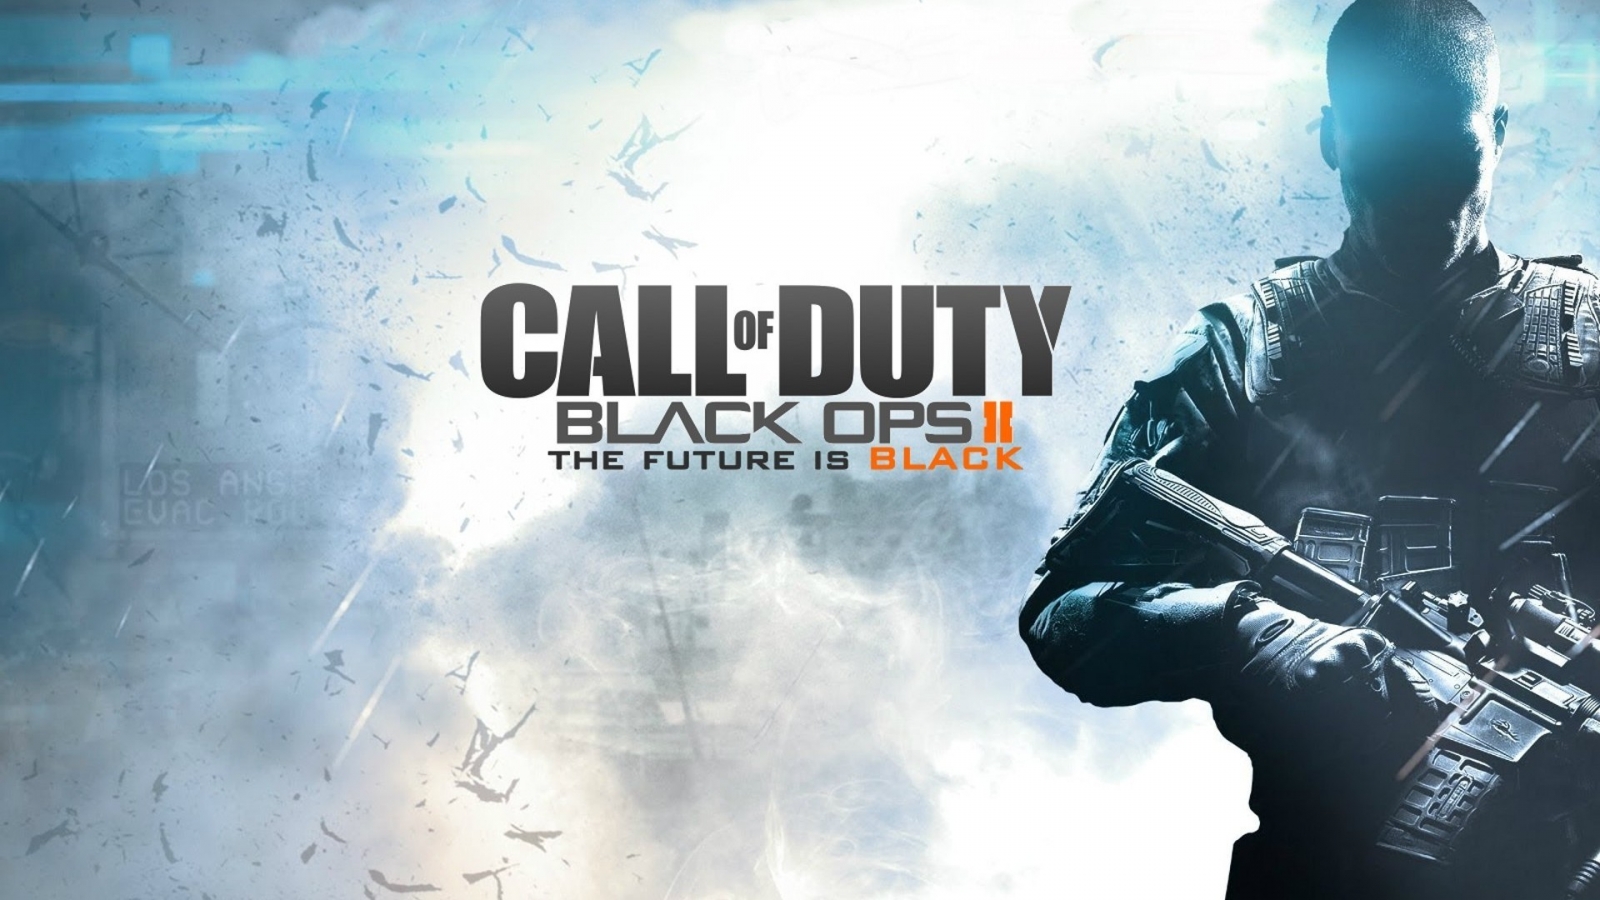 Call of Duty Black Ops 2 Future Black for 1600 x 900 HDTV resolution